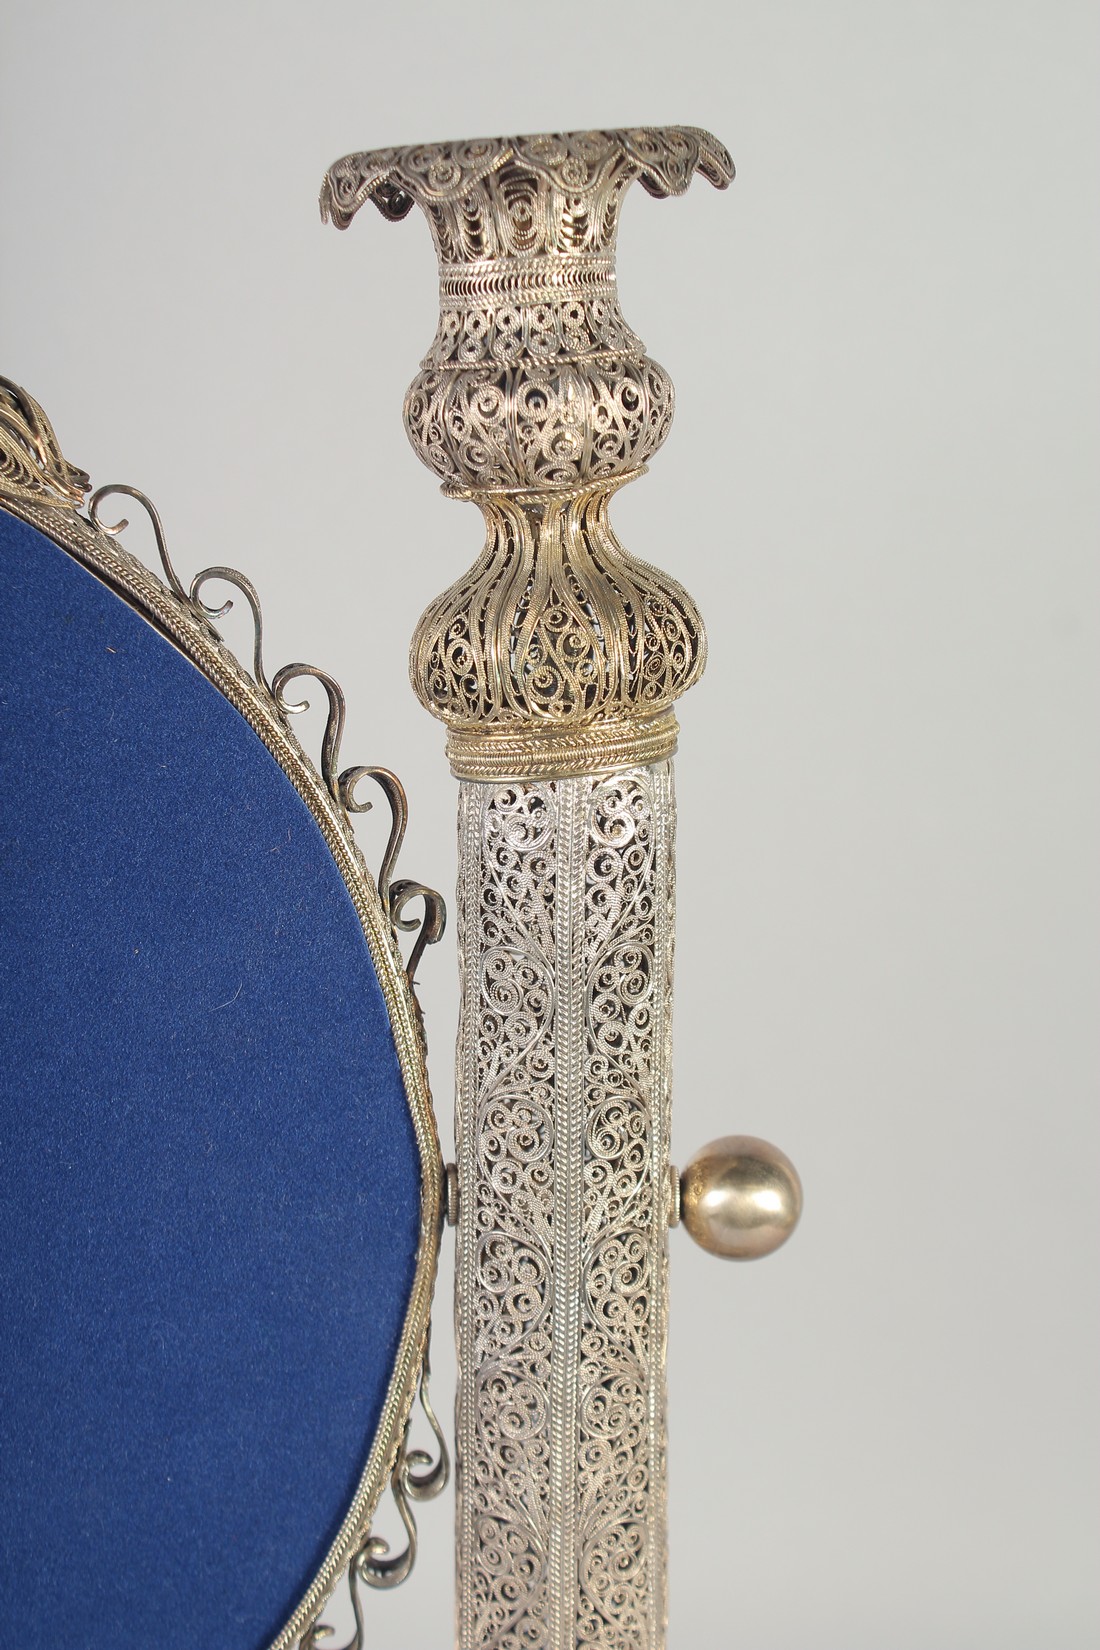 A VERY FINE AND LARGE 19TH CENTURY OTTOMAN TURKISH PARCEL GILT FILIGREE SILVER MIRROR, on a later - Image 11 of 14